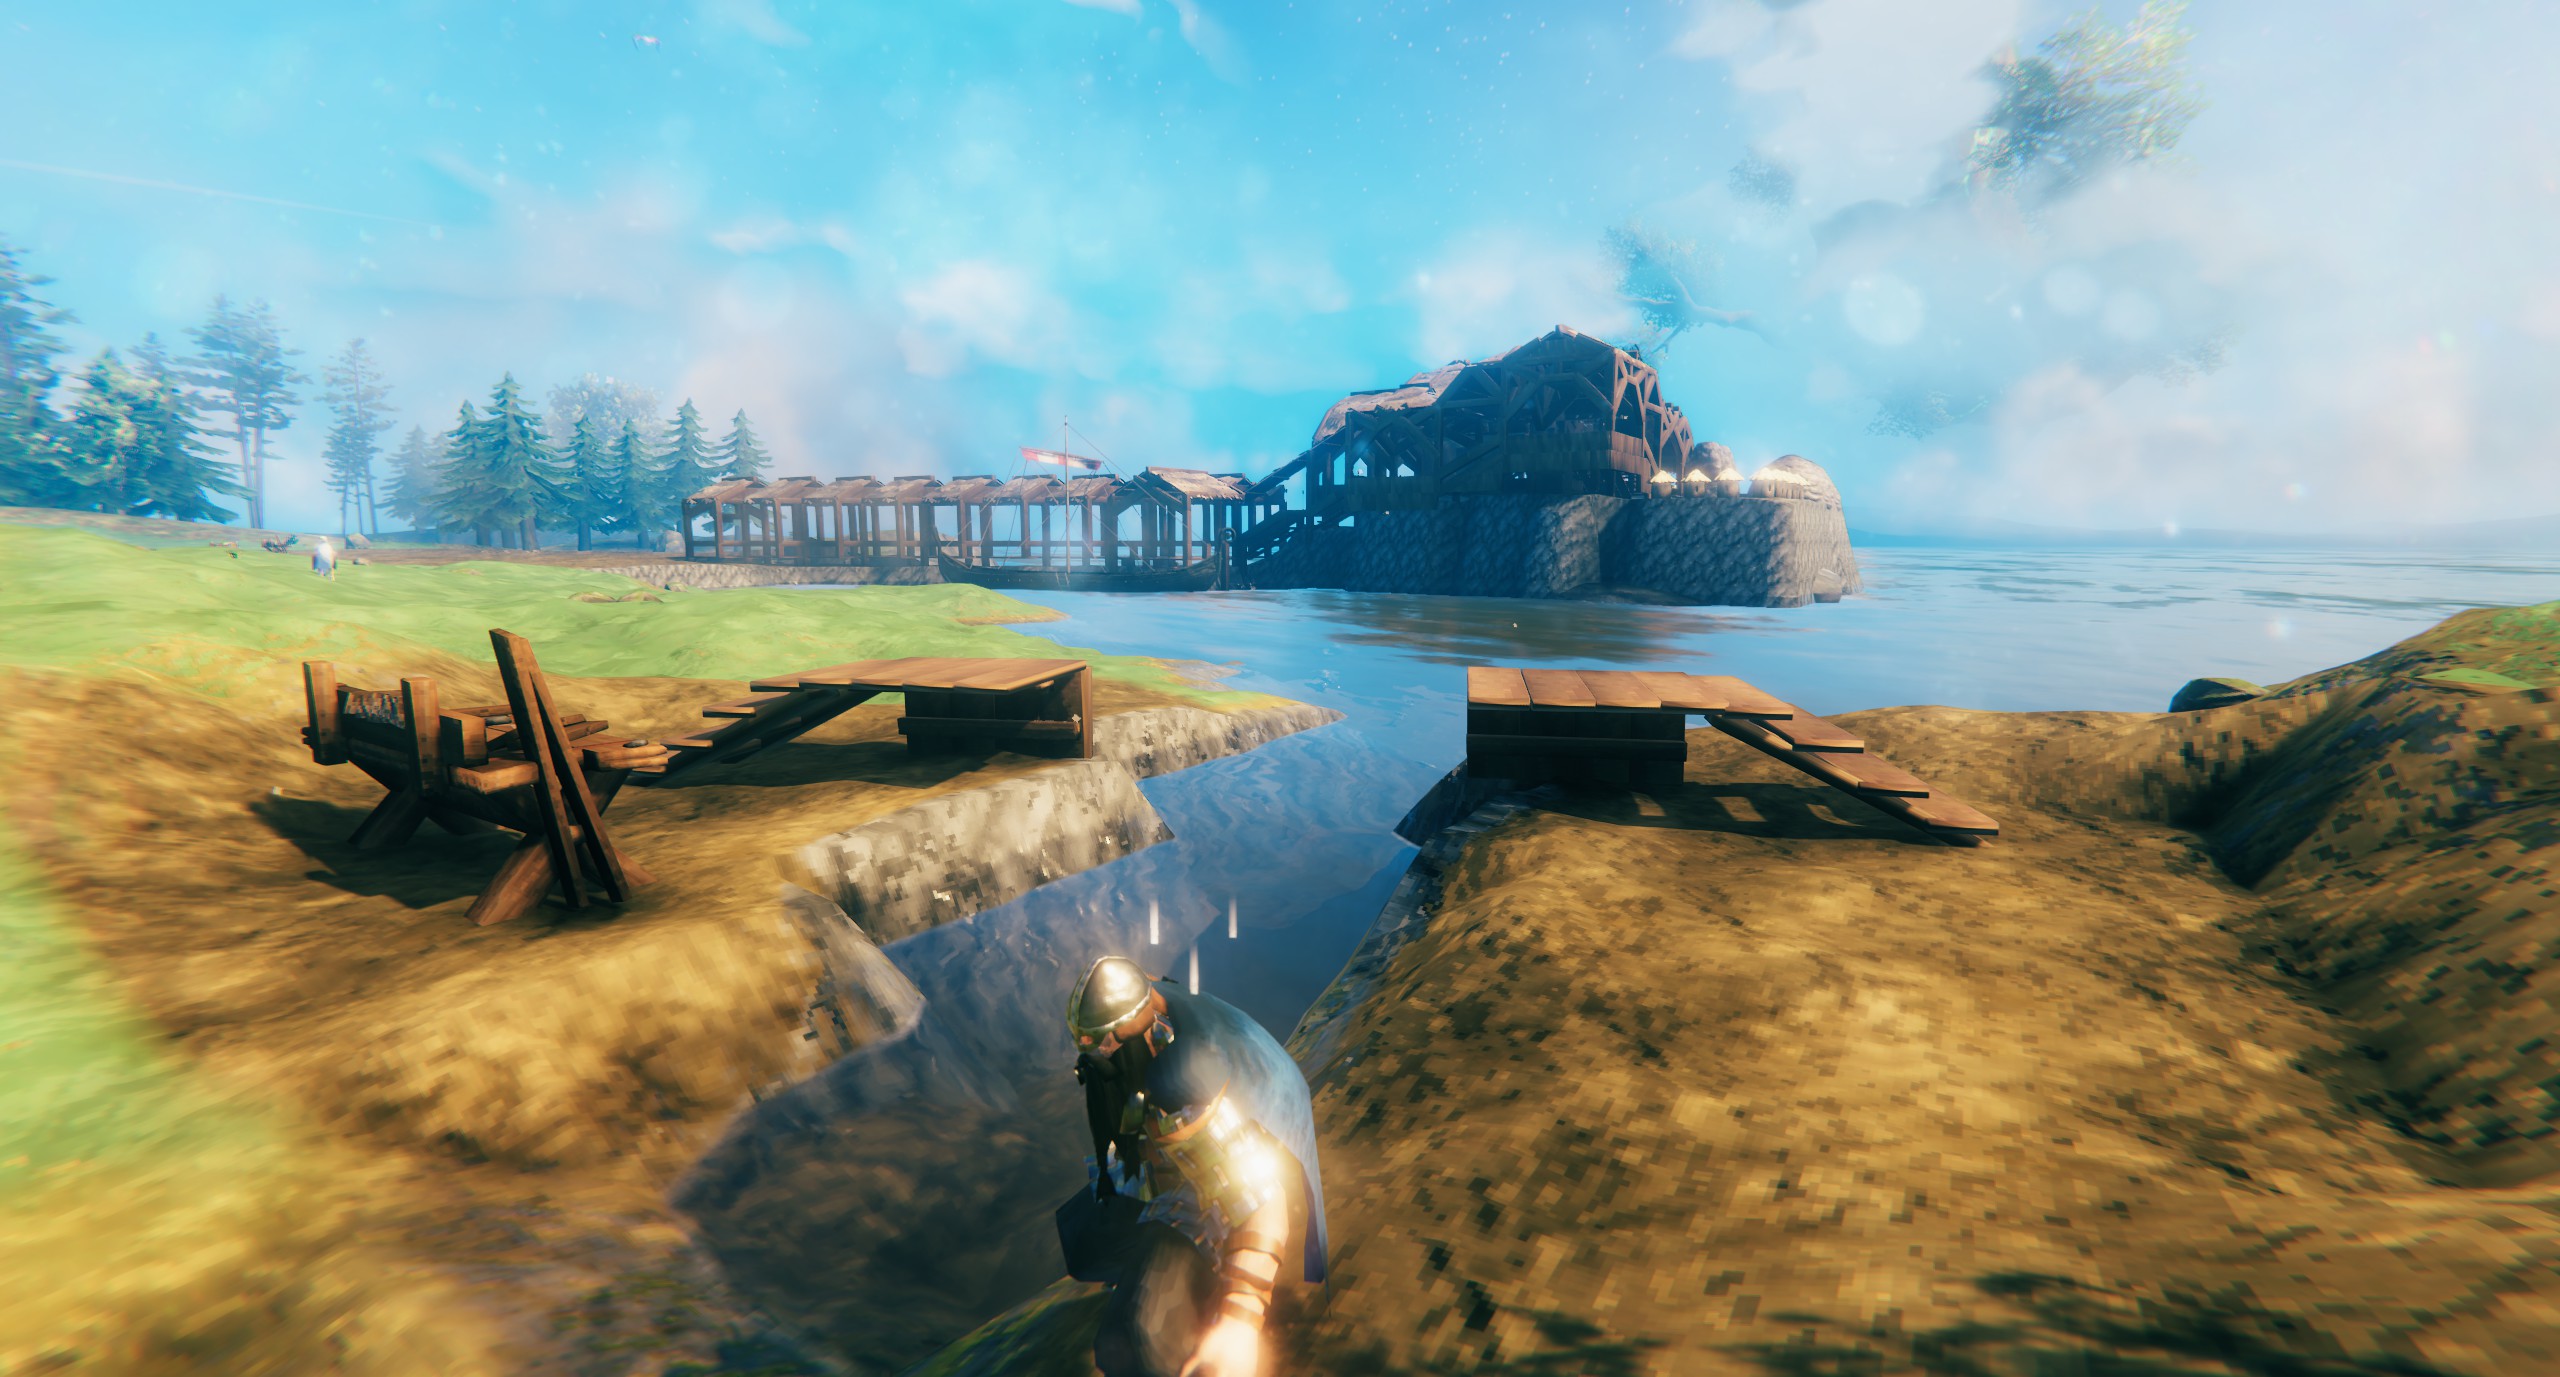 Valheim - A Bridge that mobs cannot cross! For great Castles!